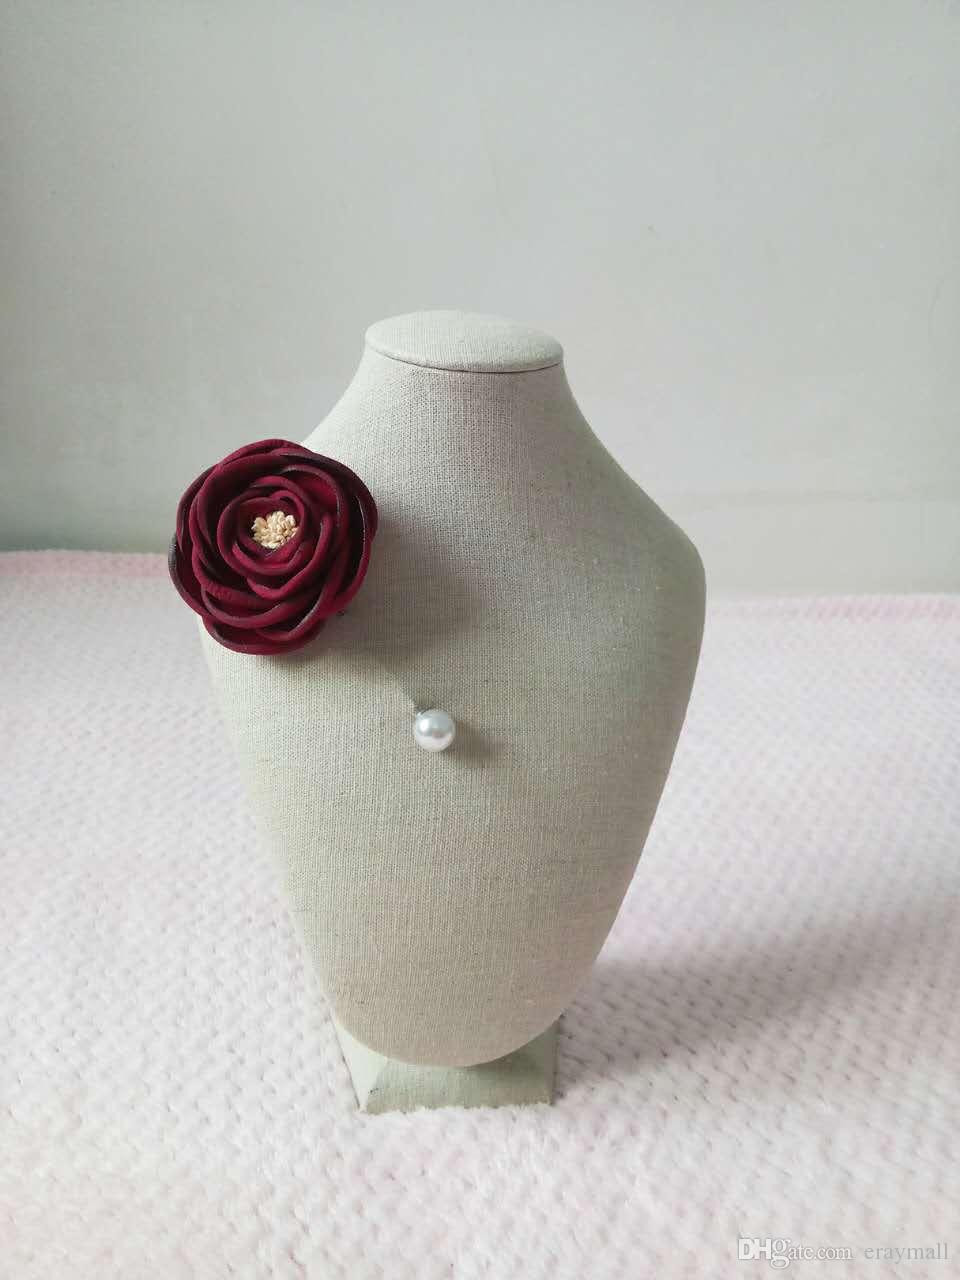 10 Lovable Lapel Pin Vase How to Use 2022 free download lapel pin vase how to use of 2018 new fashion men and women brooch rose flower lapel pin suit throughout new fashion men and women brooch rose flower lapel pin suit boutonniere fabric yarn p